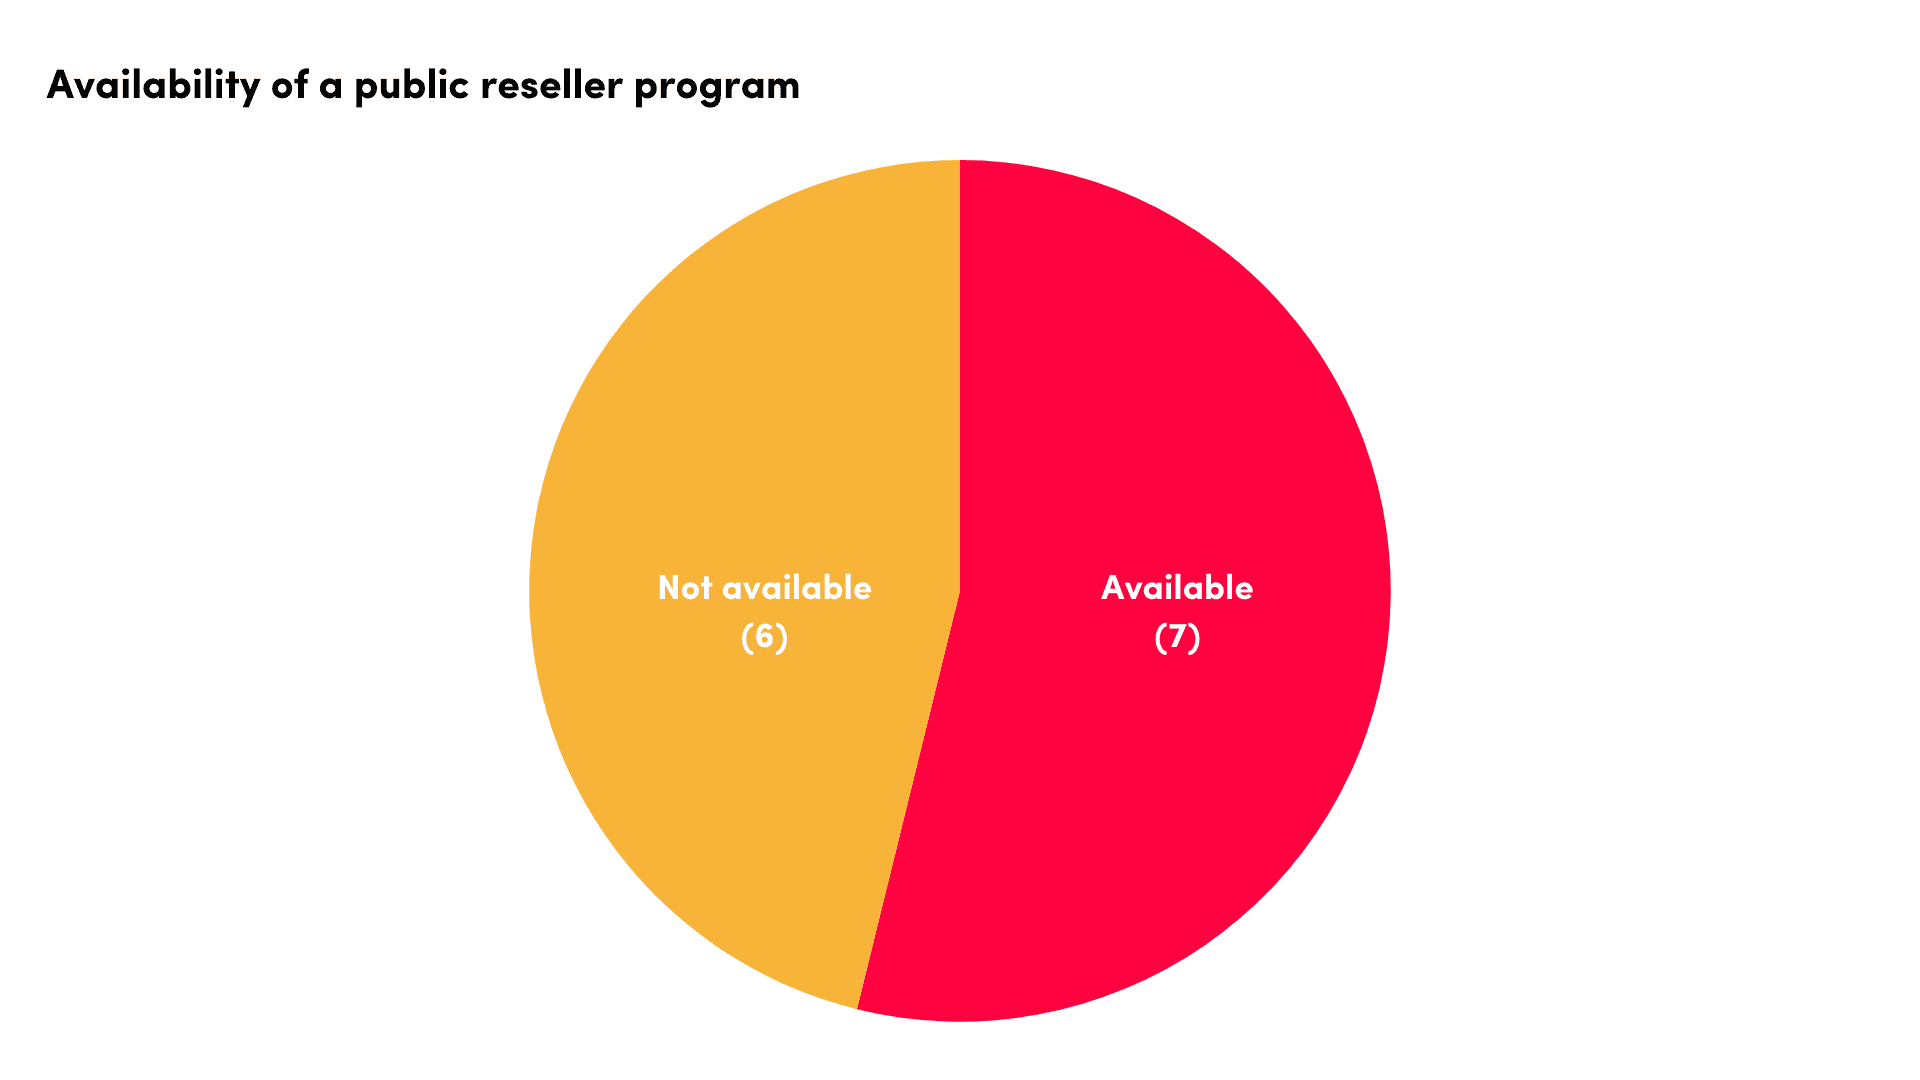 availability of public reseller programs